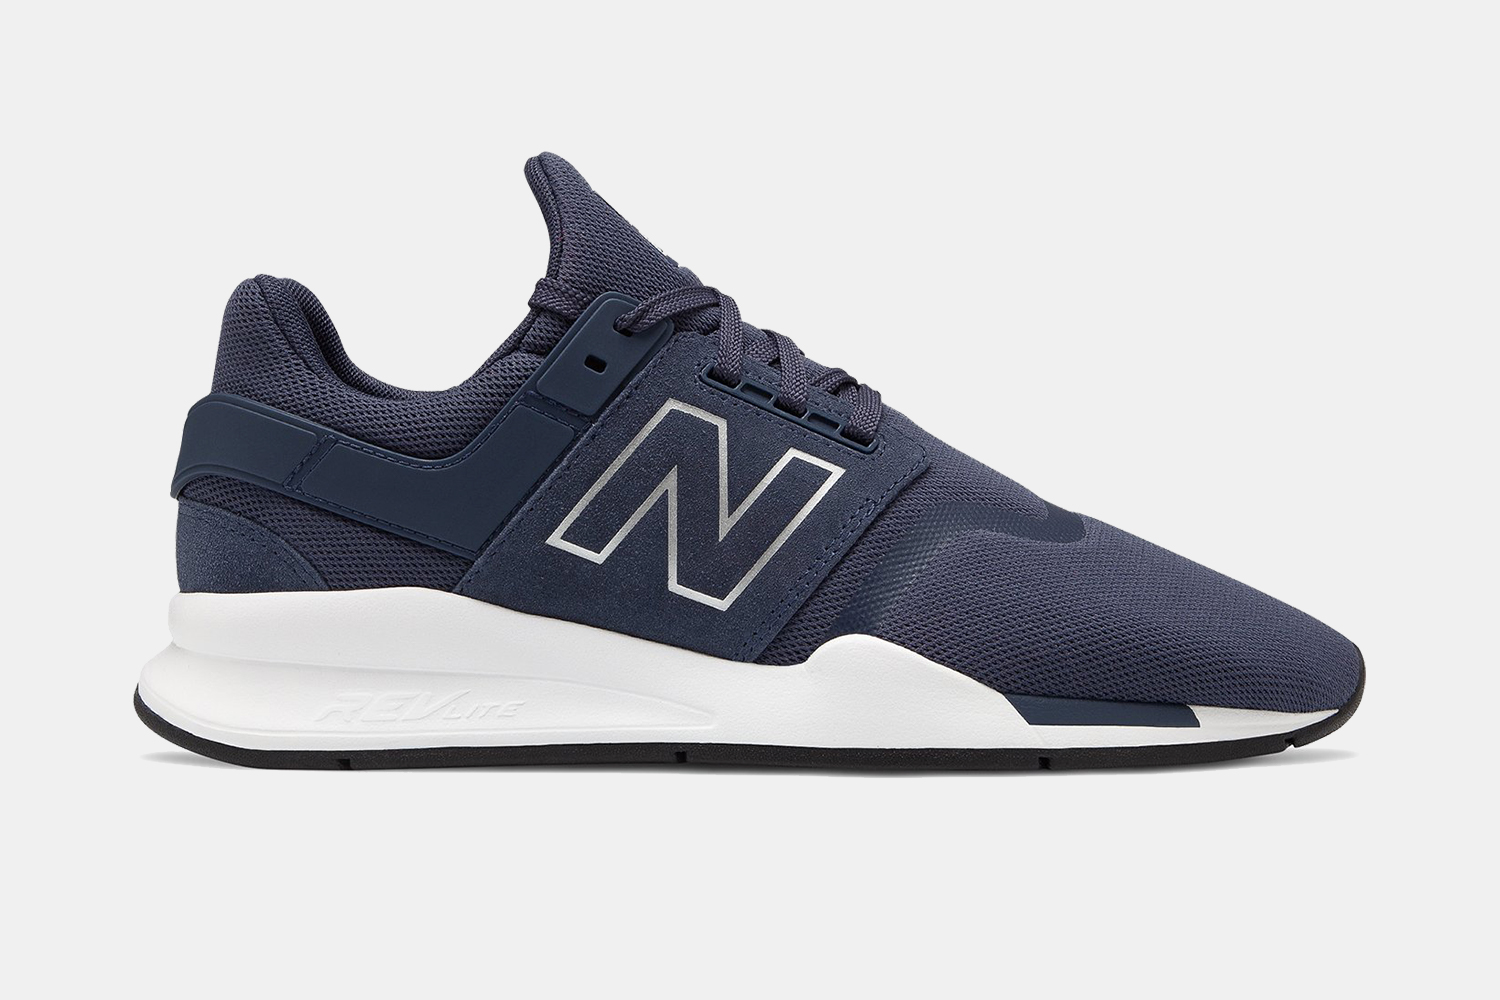 New Balance 247v2 Sneakers